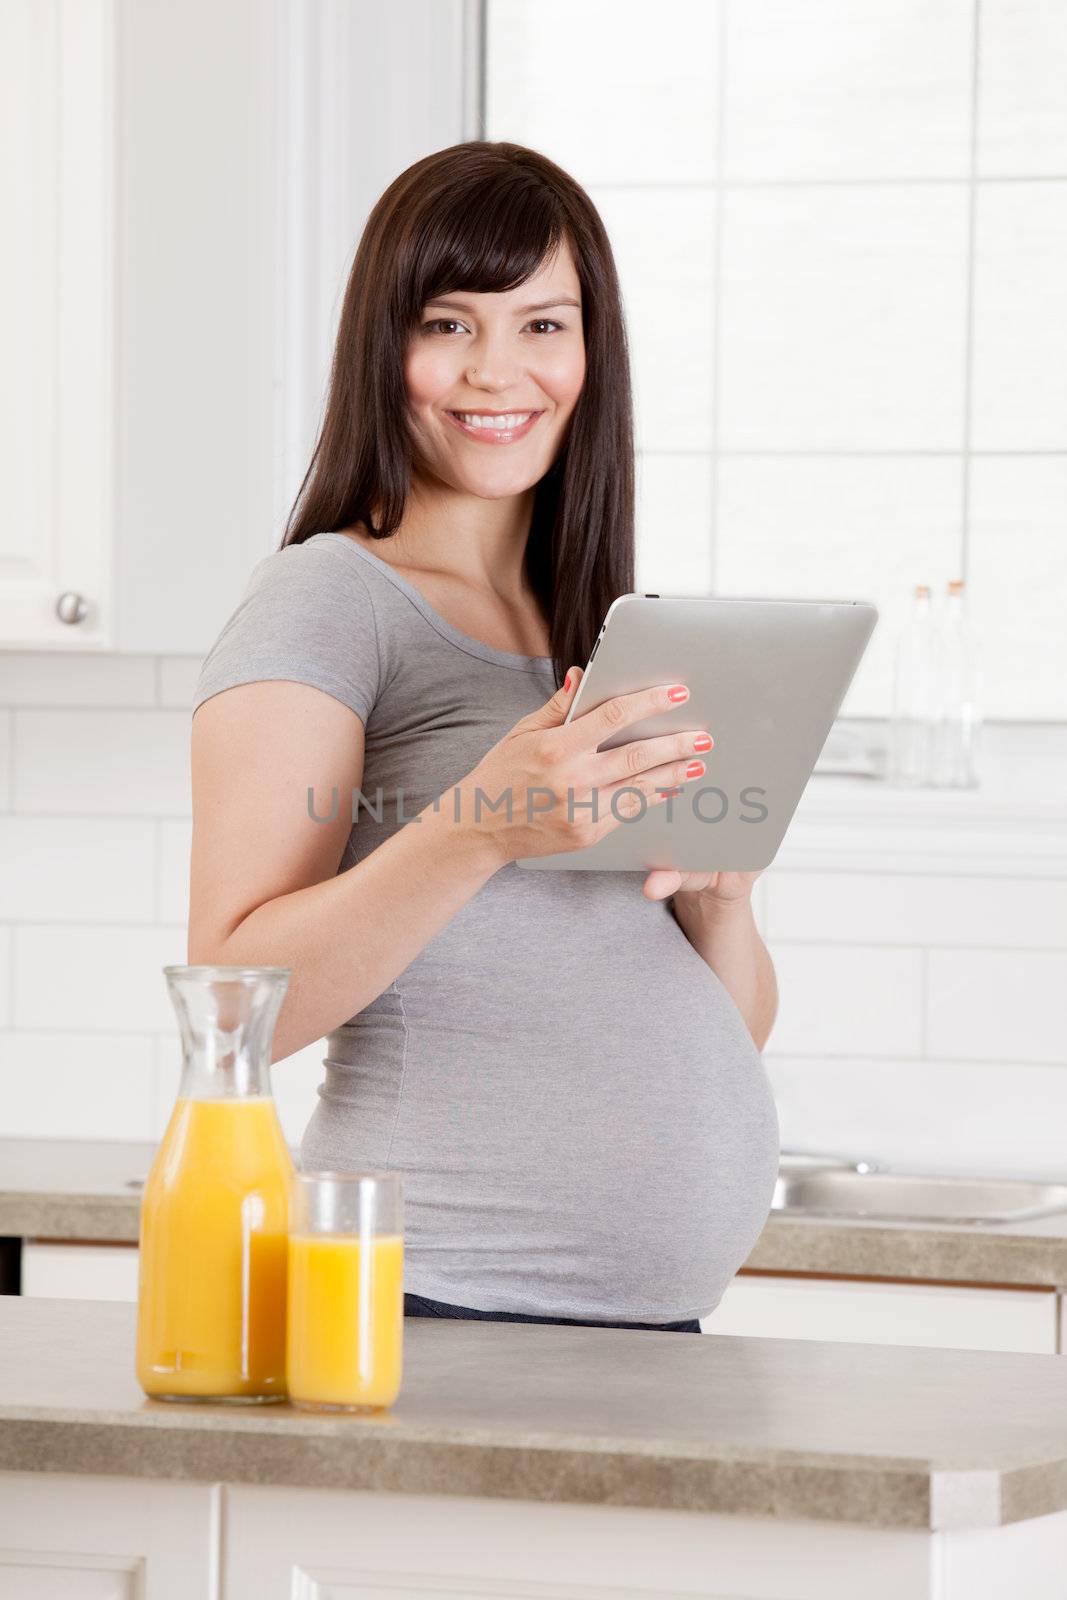 Pregnant woman in kitchen with digital tablet and orange juice